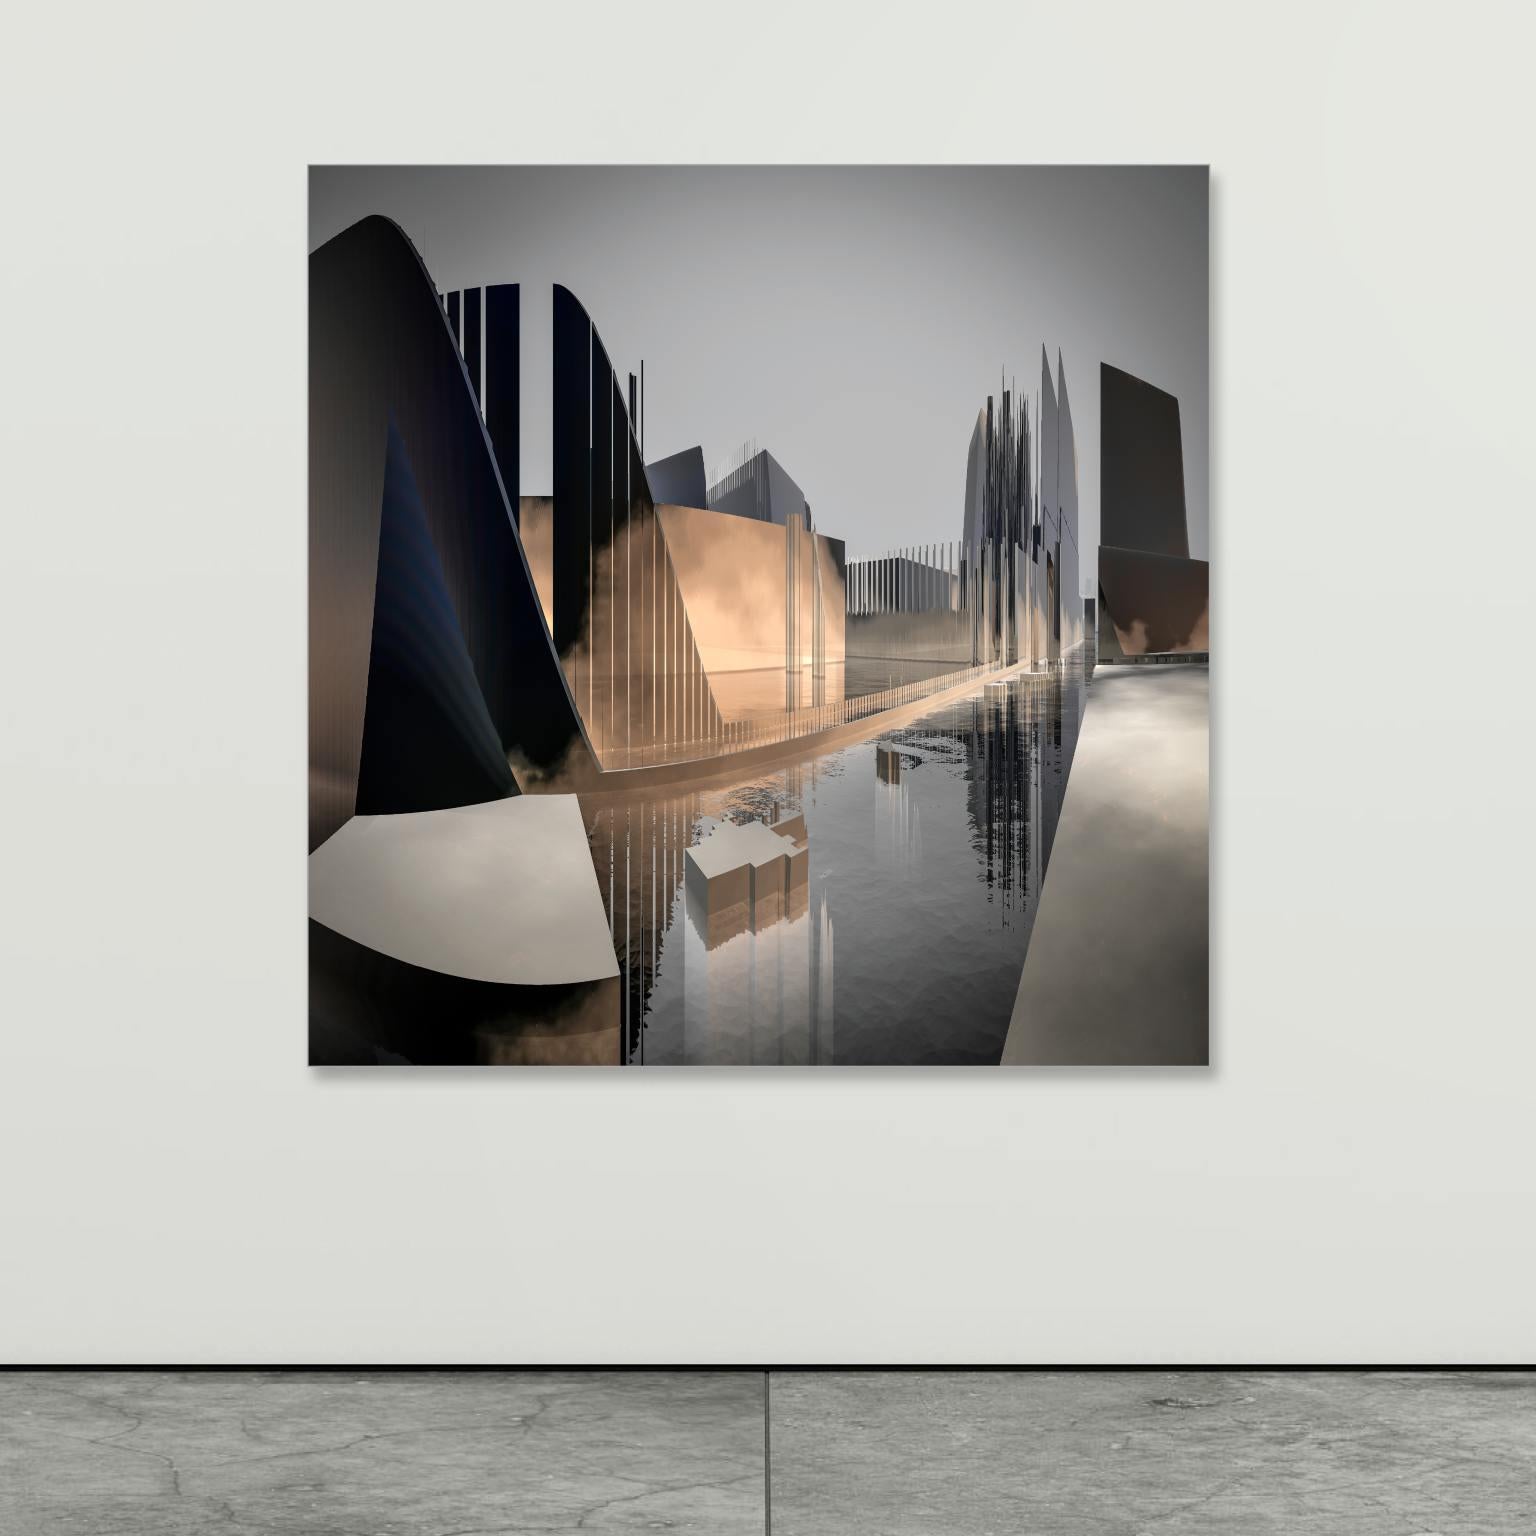 City Landcuts - Vision of a Urban Territory - Abstract Cityscapes - Contemporary Photograph by Paul-Émile Rioux